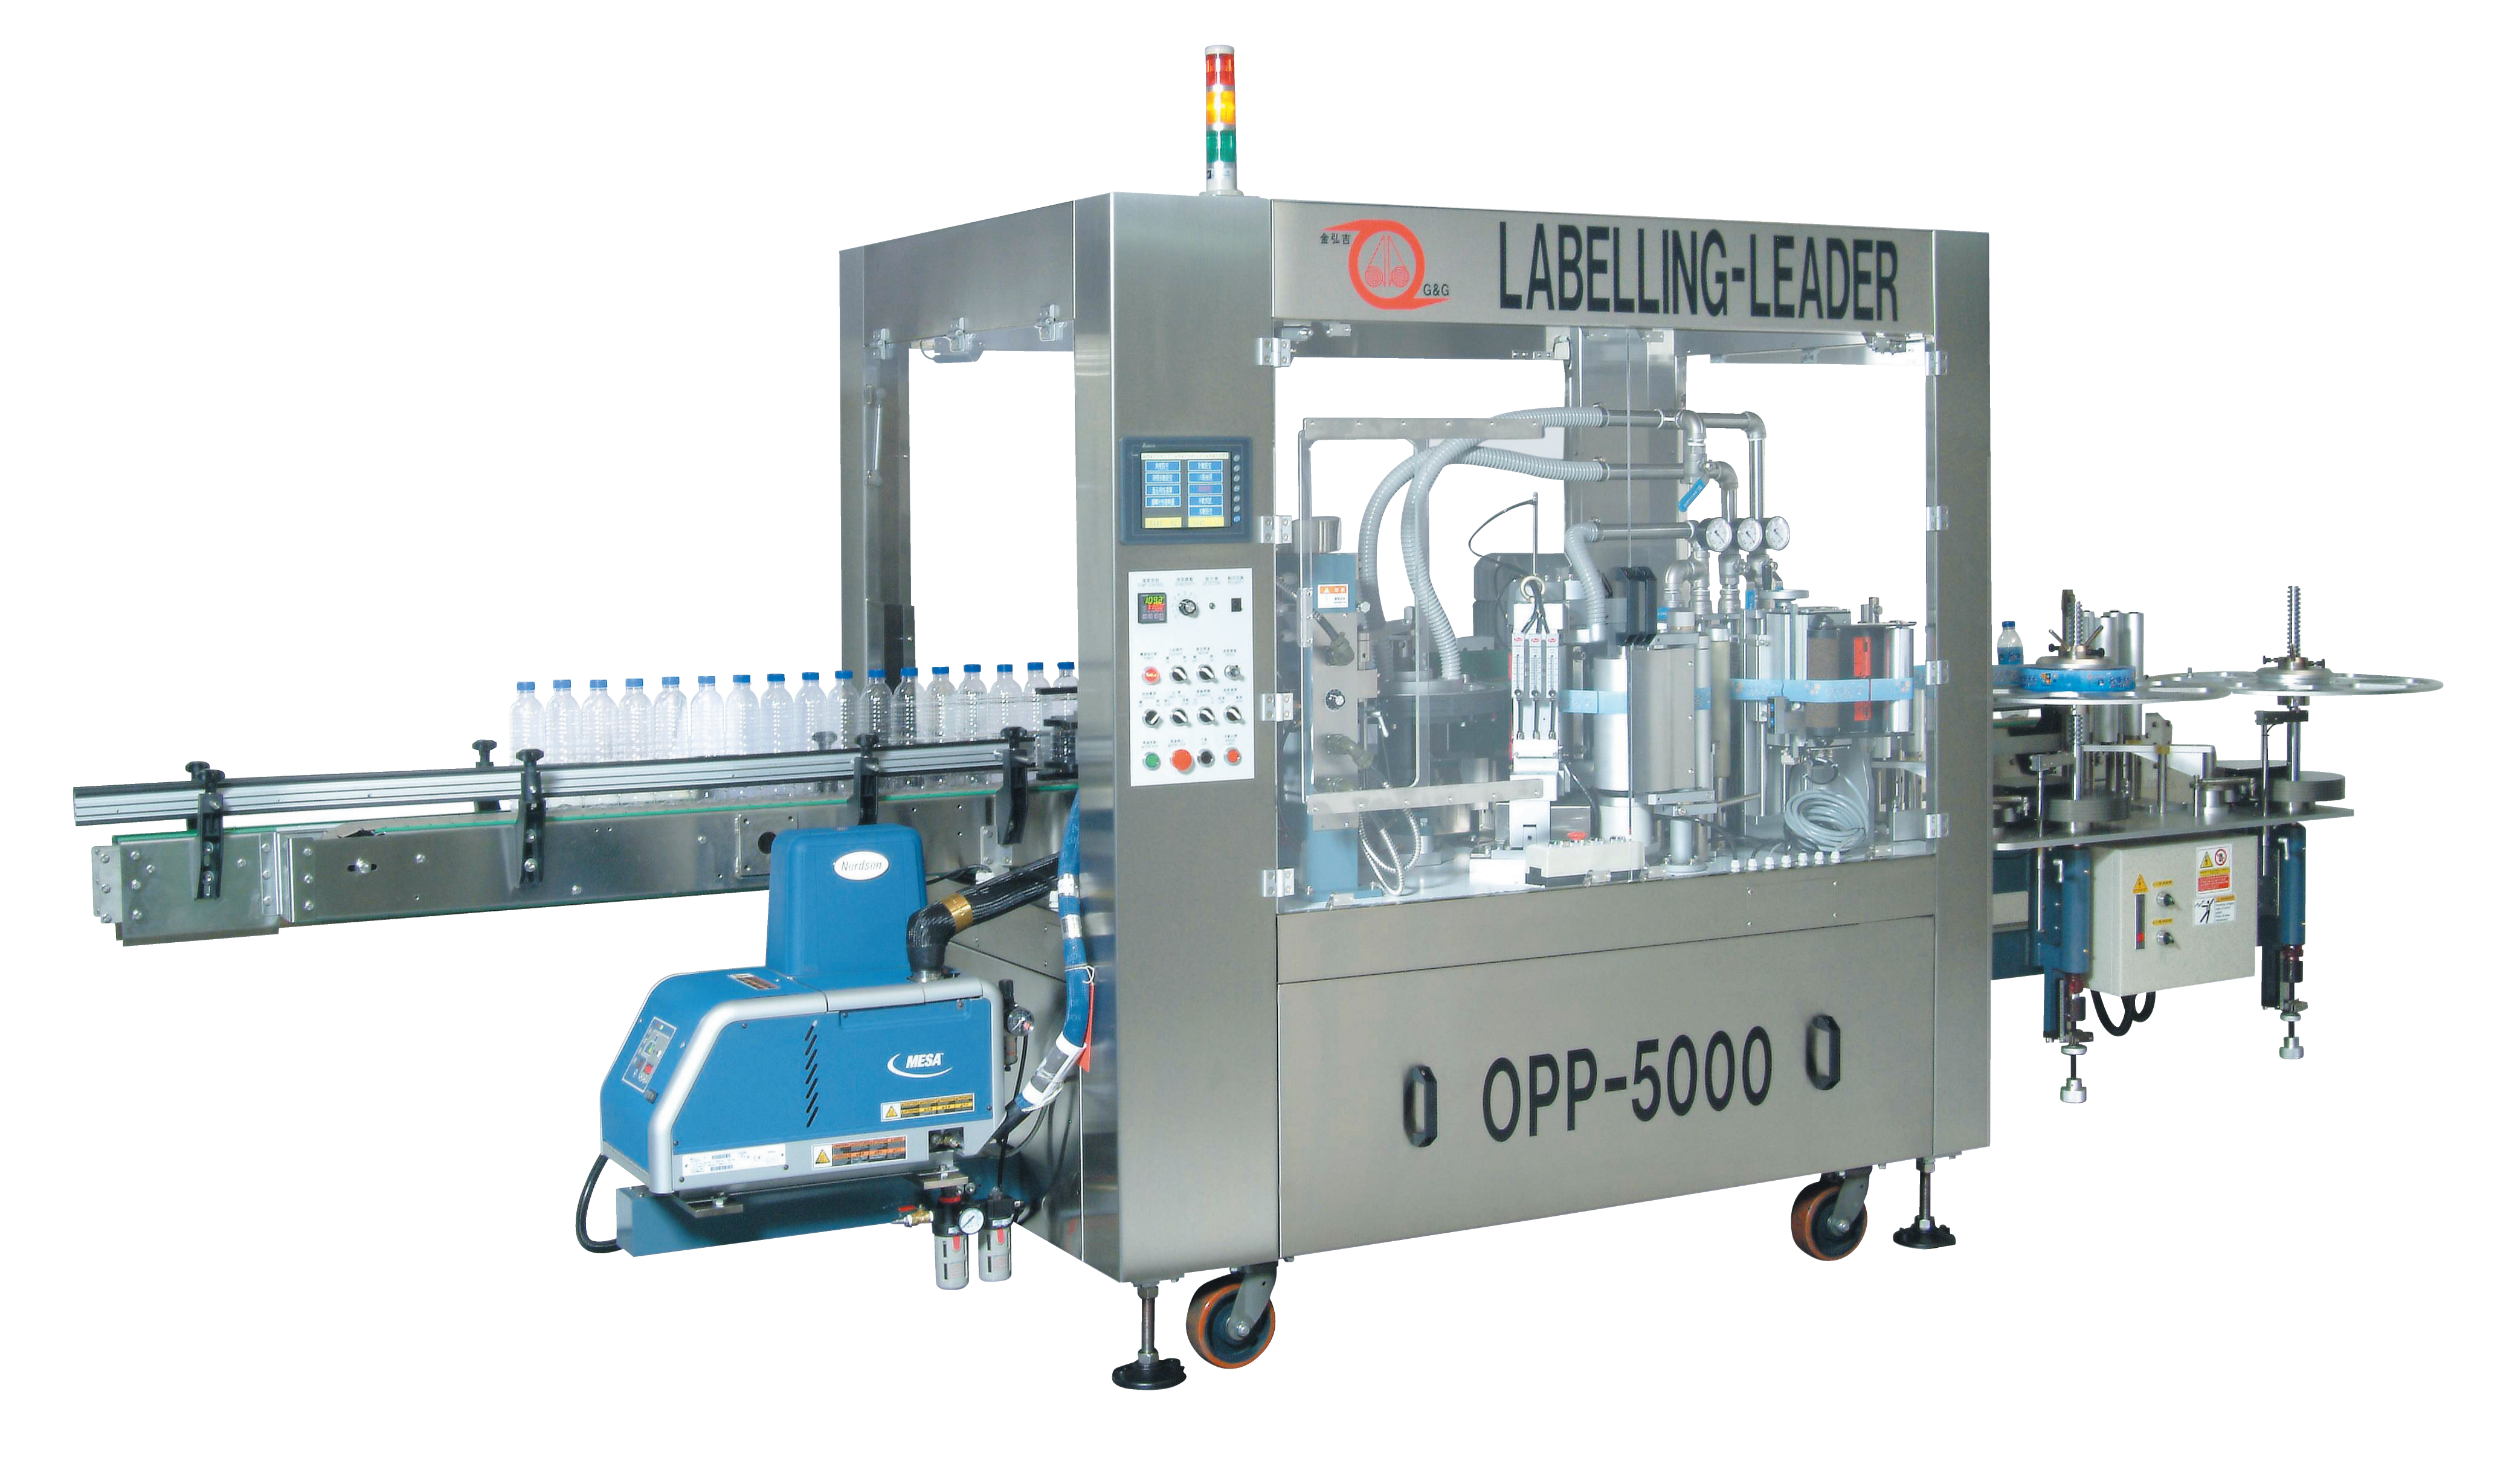 Gold Great Good's MD-5000-OPP automatic high-speed OPP labeling machine for round bottles features labeling speed of 60-800 bottles per minute.